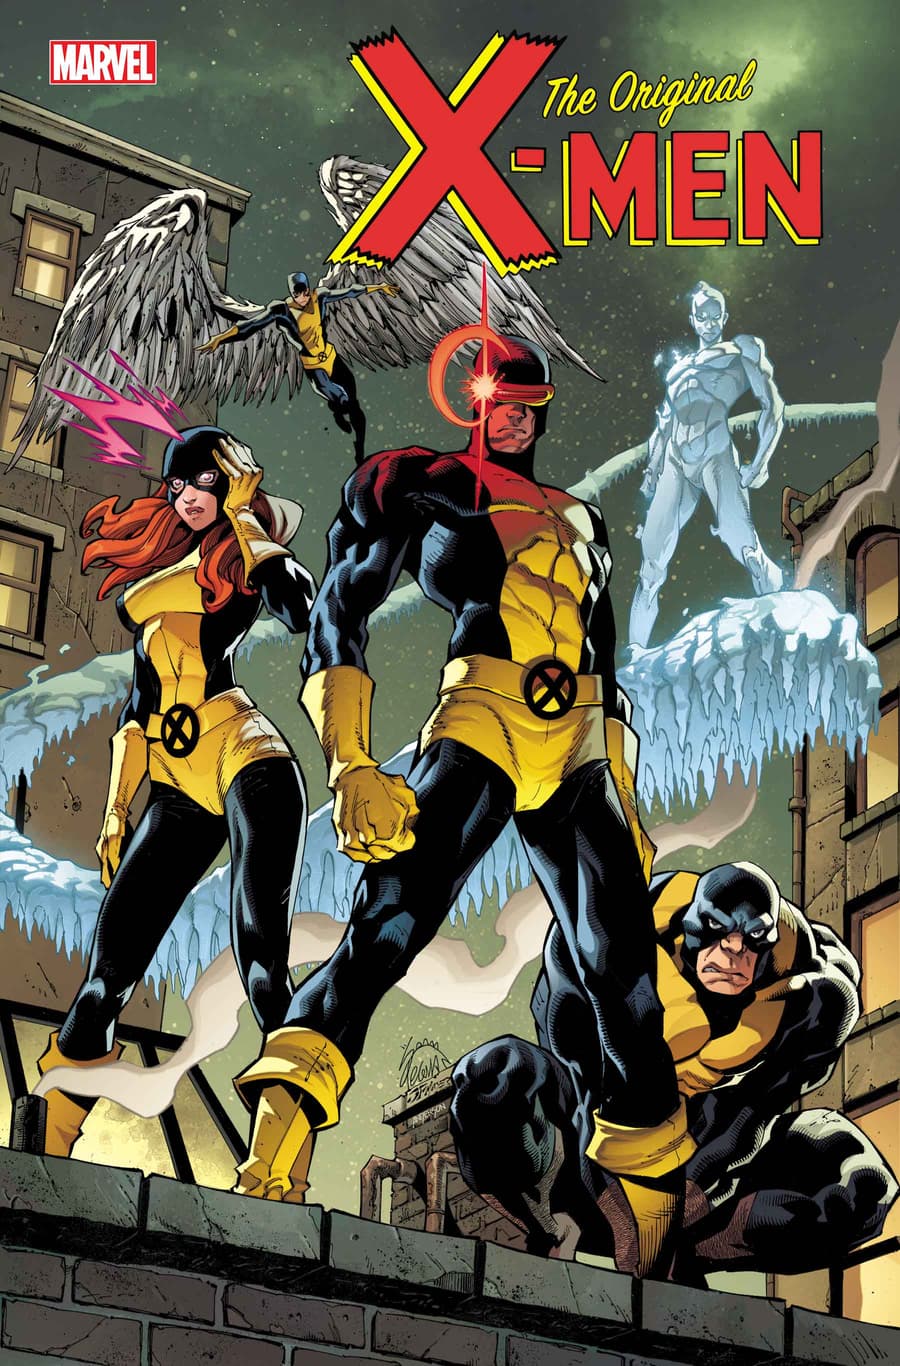 Original X-Men #1 First Look Revealed by Marvel